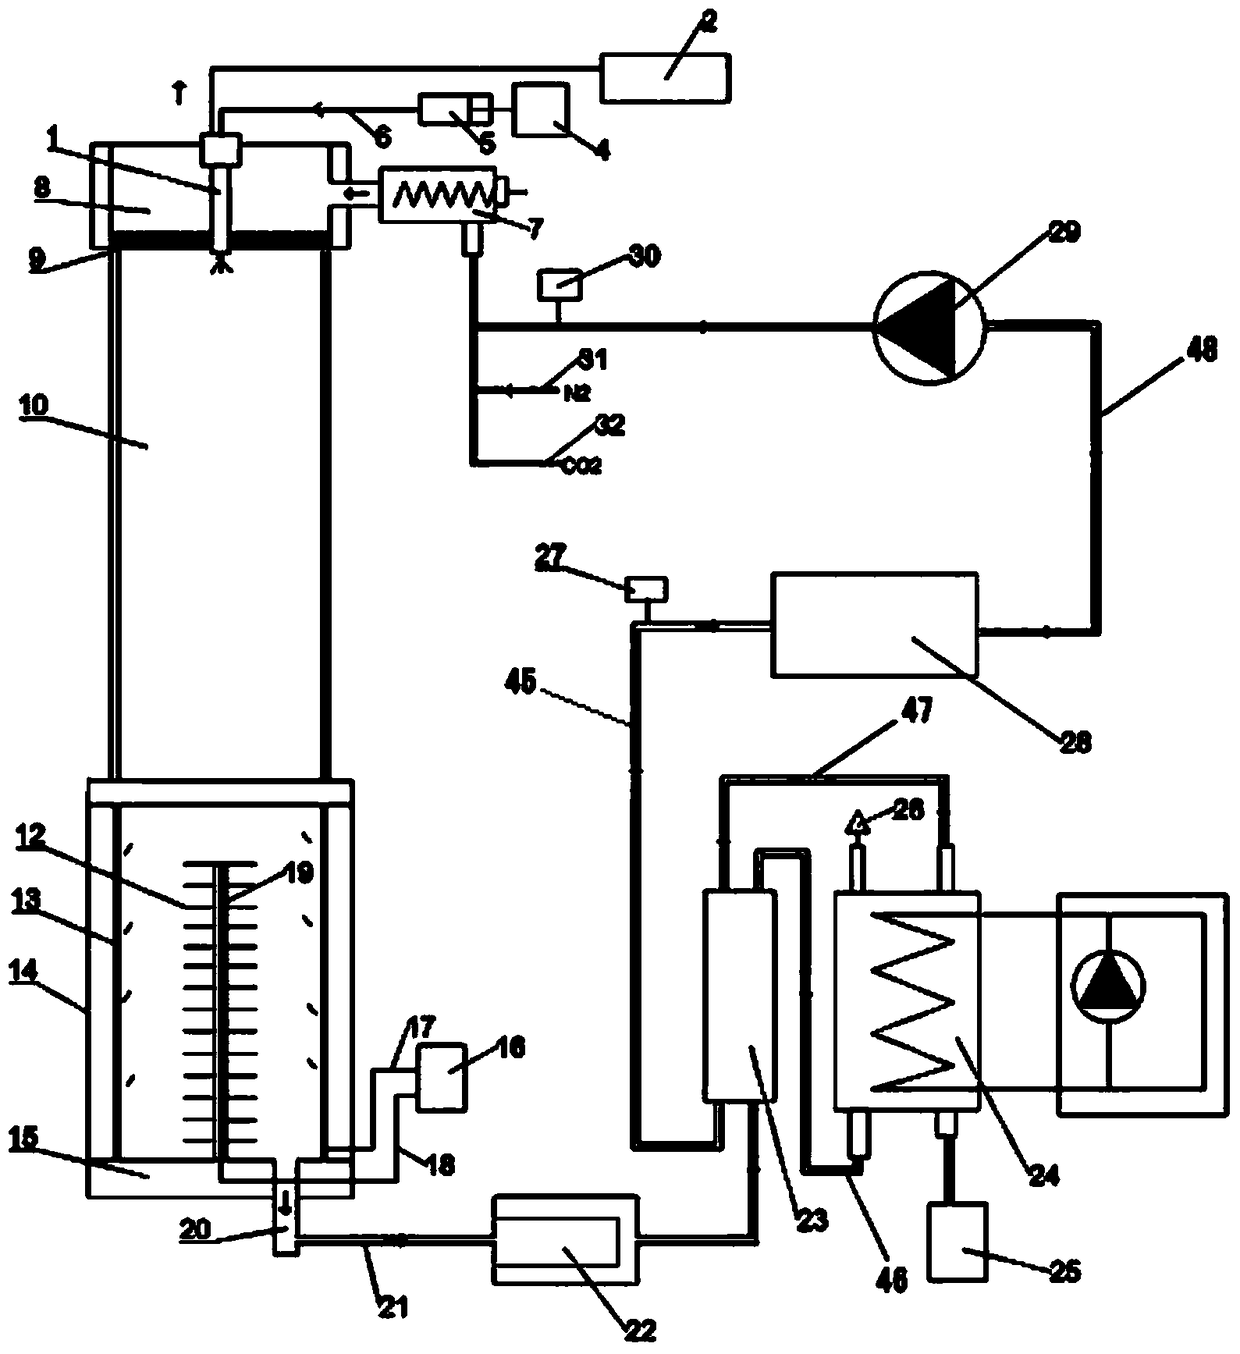 High-frequency ultrasonic atomization particle preparation system with dynamic monitoring